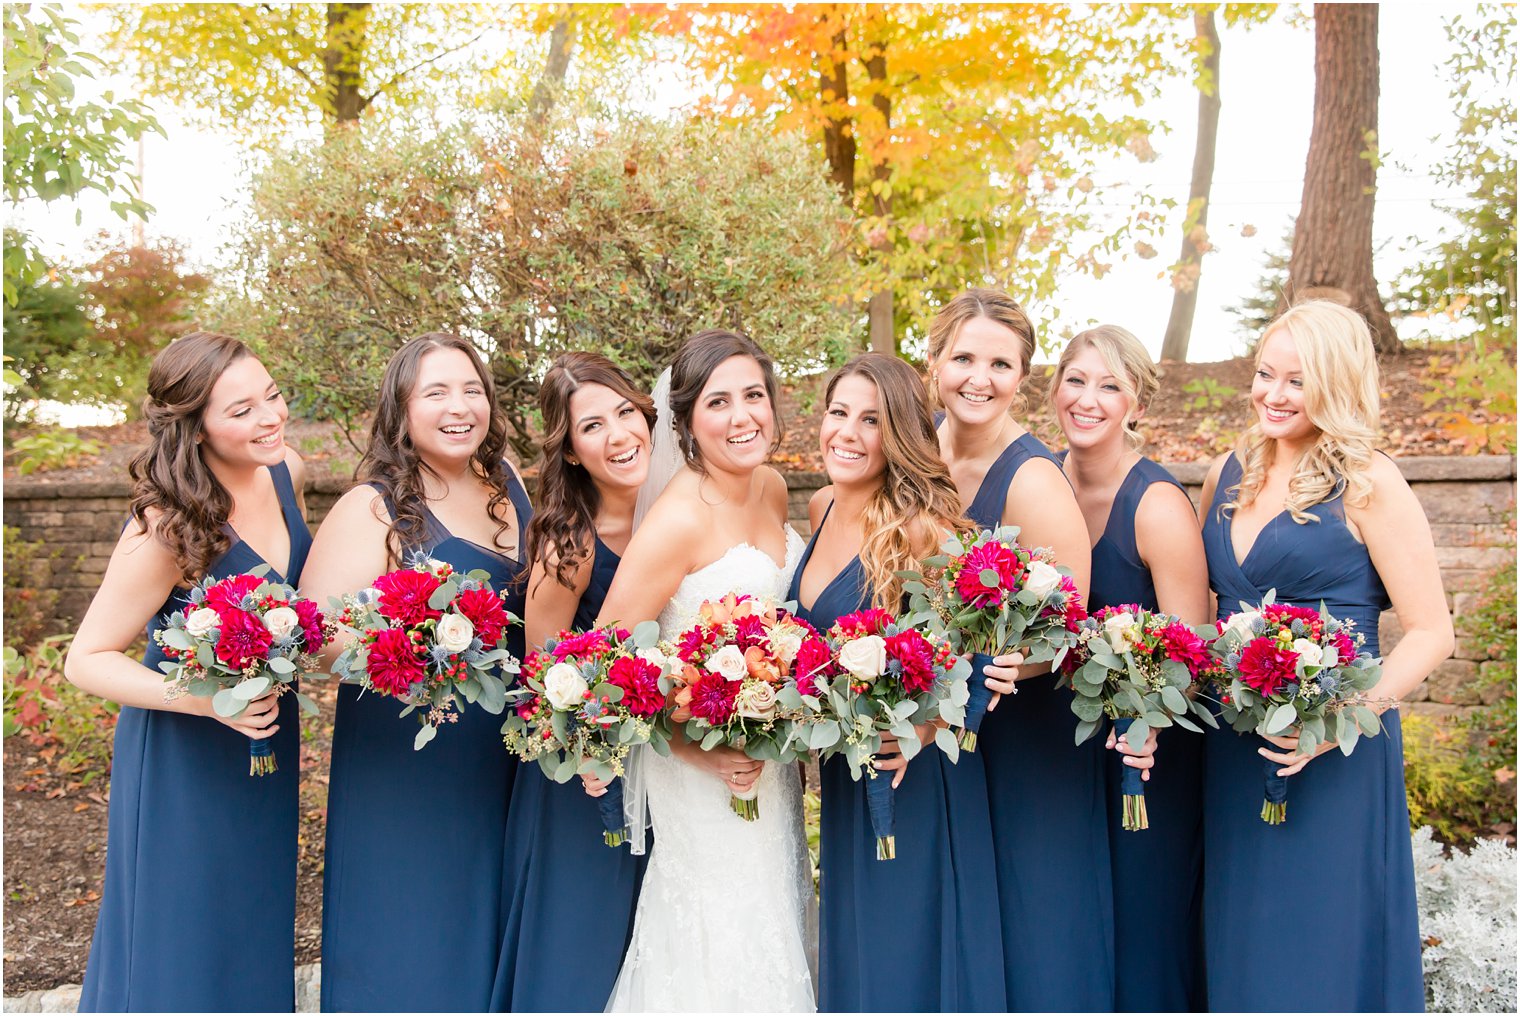 Bridesmaids with bouquets from Sayrewoods Florist | Photos by NJ Wedding Photographers Idalia Photography